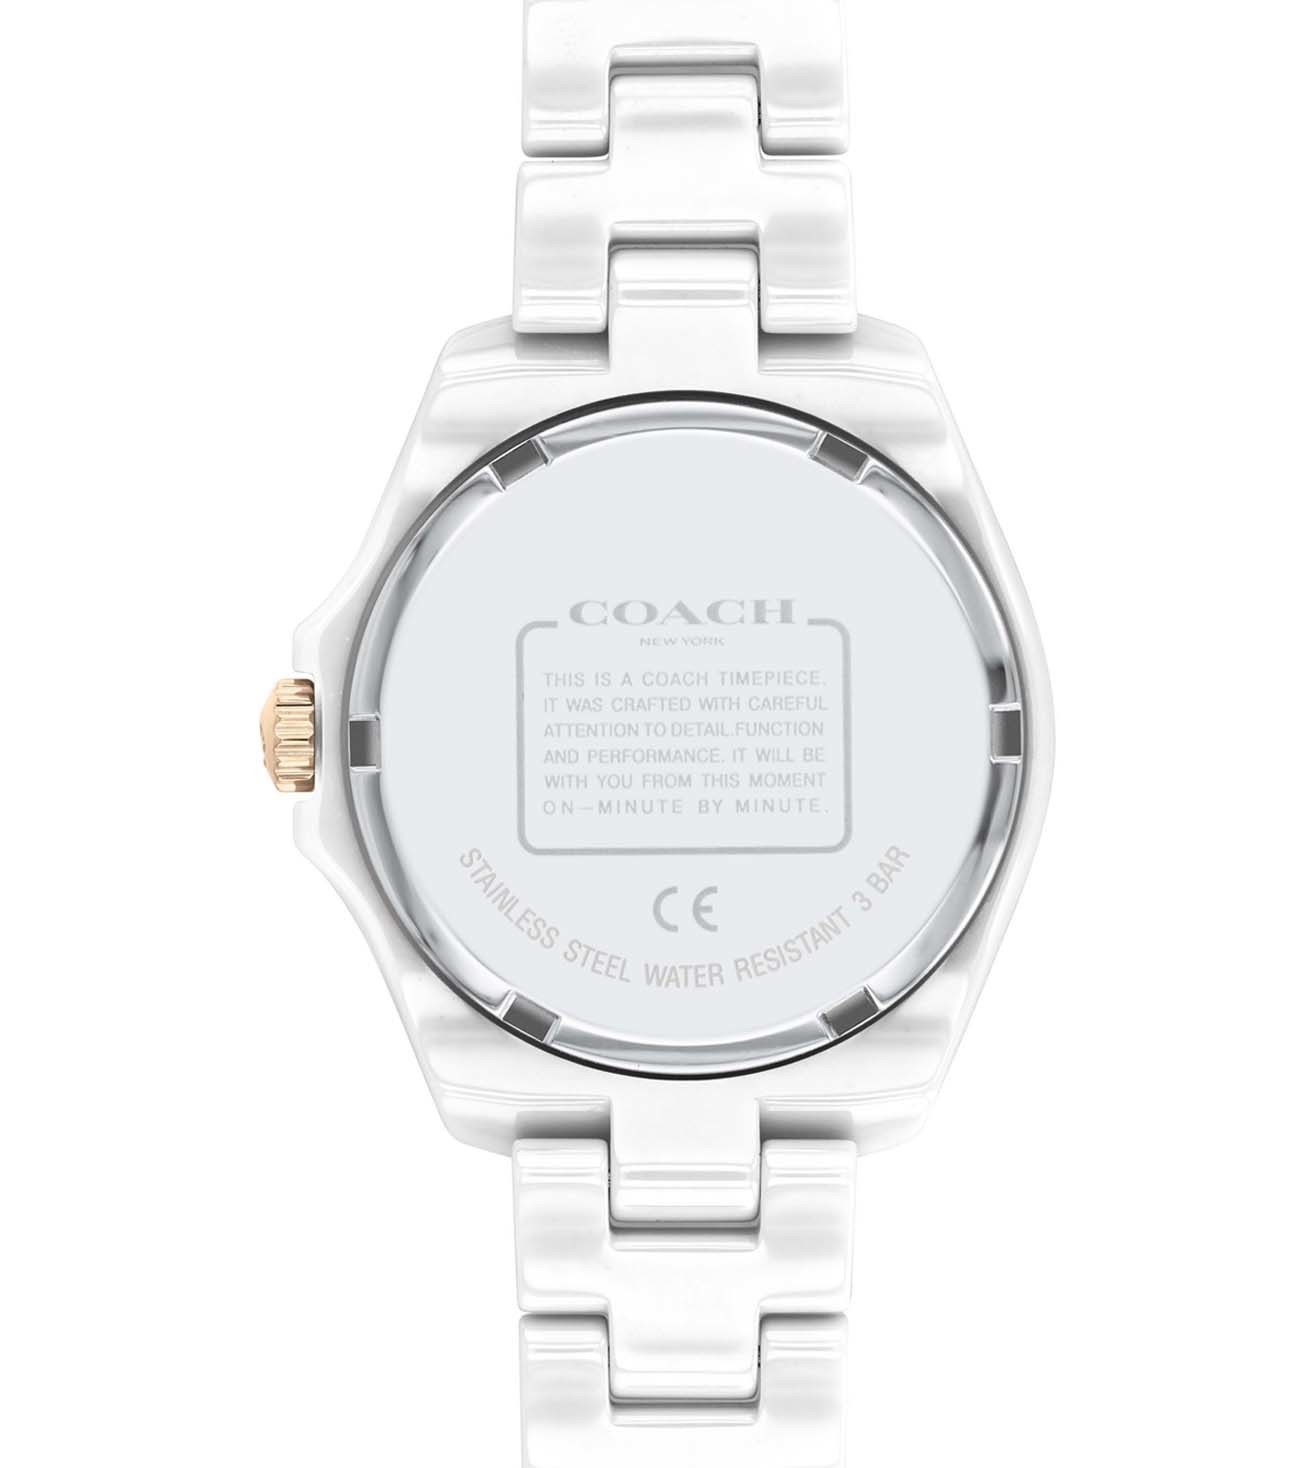 ĐỒNG HỒ COACH WOMENS 33.25 MM PRESTON MOTHER OF PEARL DIAL STAINLESS STEEL ANALOGUE WATCH 1